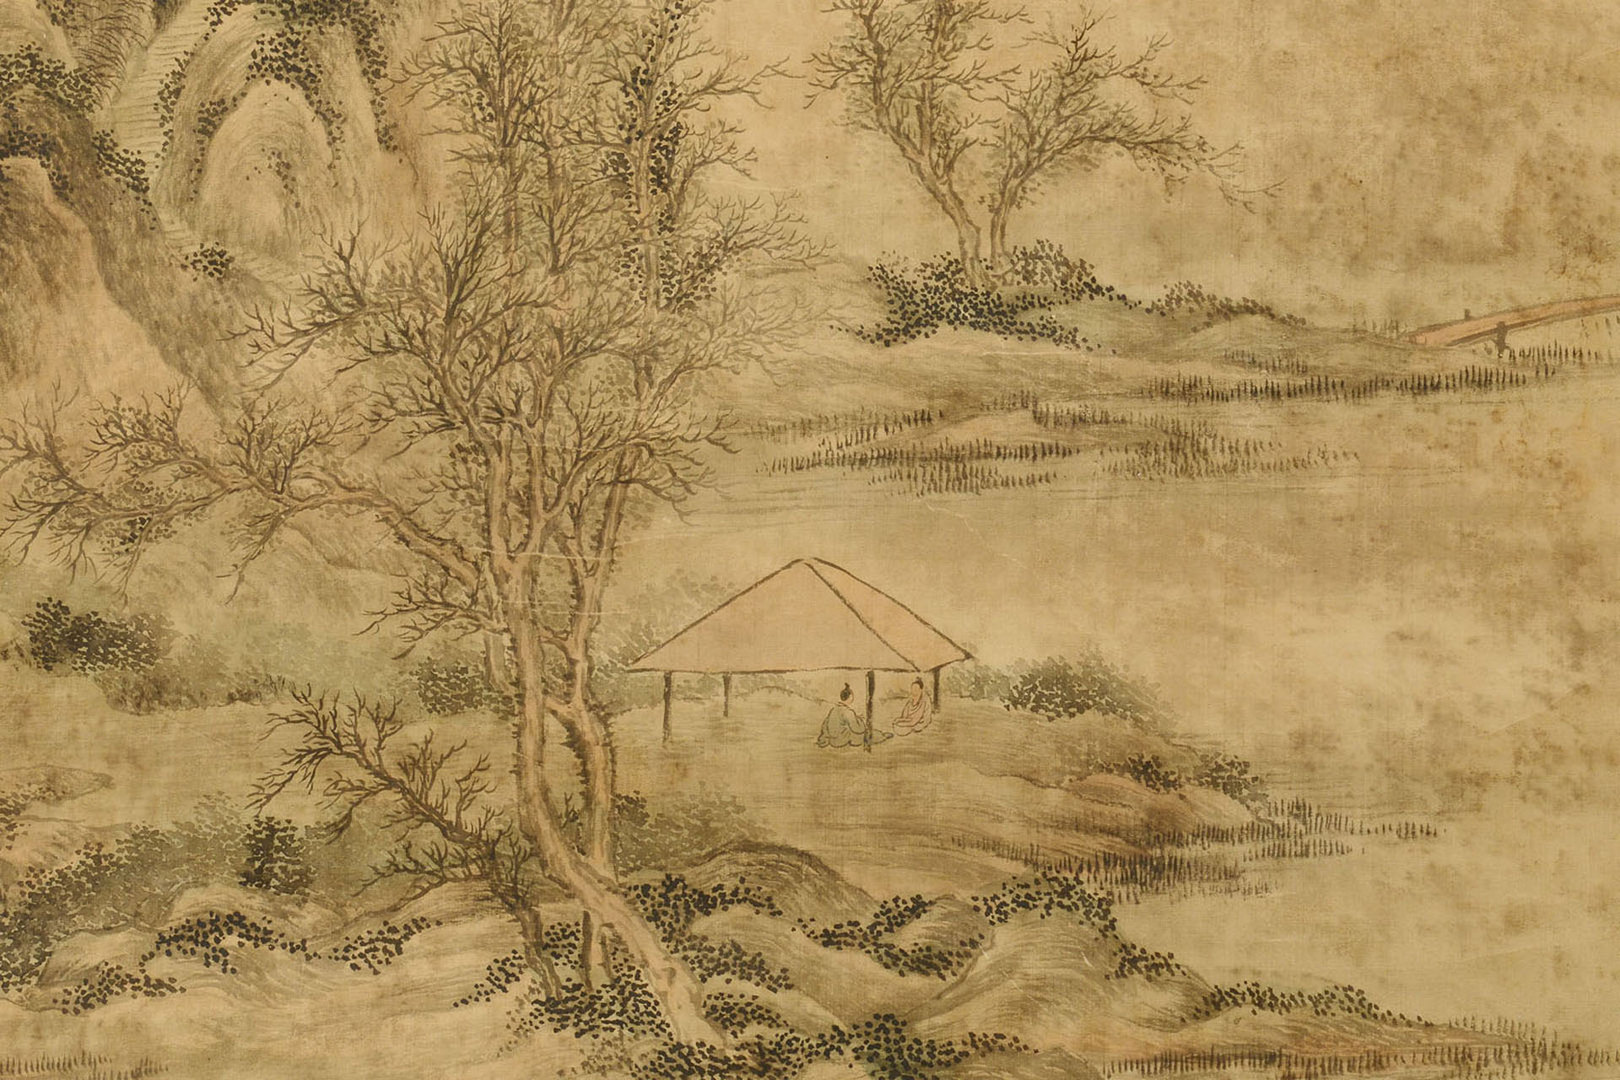 Lot 212: Chinese Watercolor Mountain Landscape Scroll